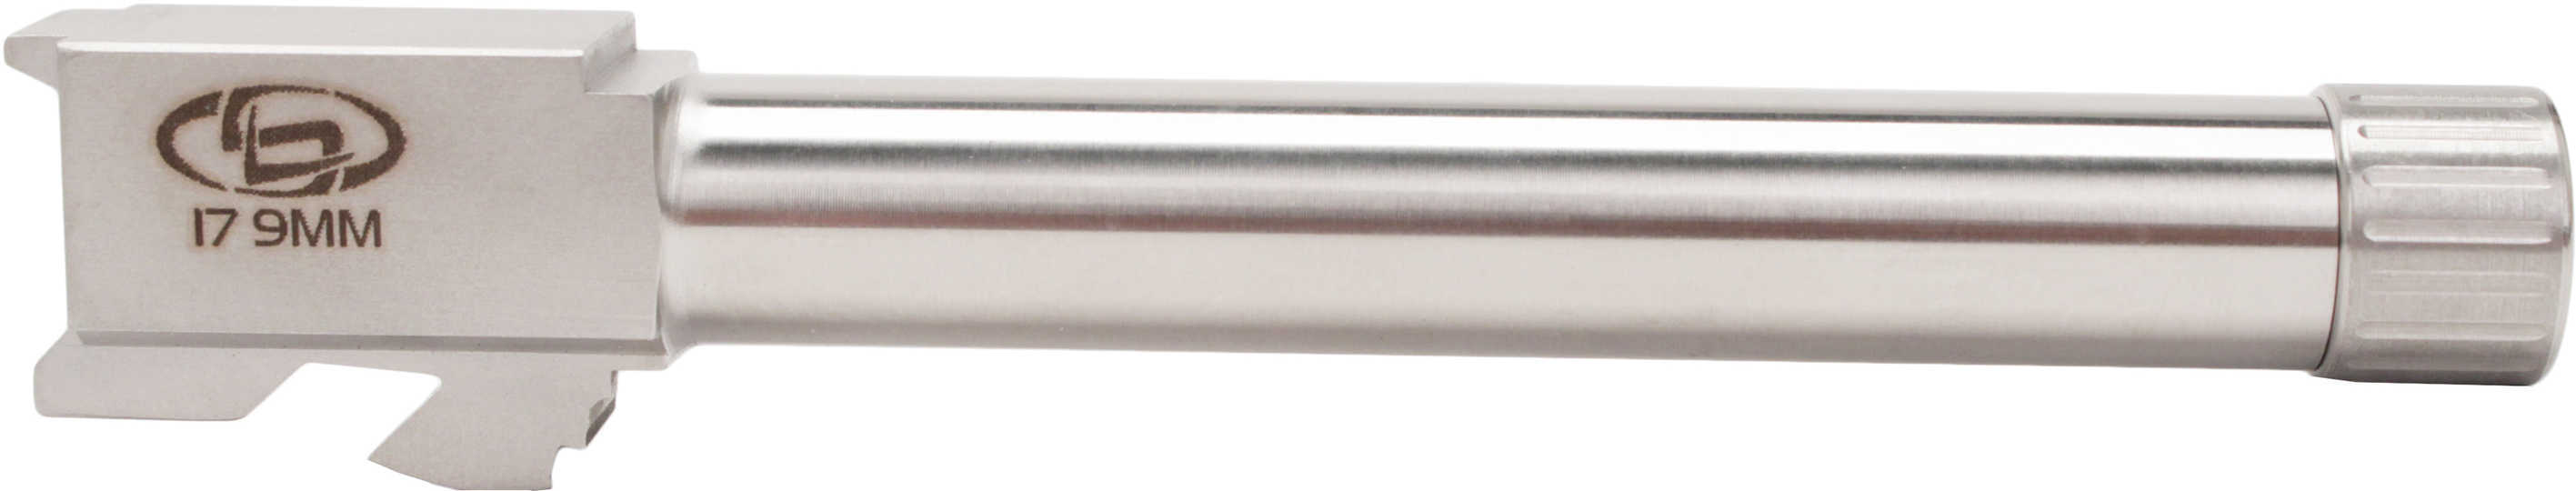 StormLake Barrels Lake 9MM 5.19" Fits Glock 17 Stainless Finish with Thread Protector 34002